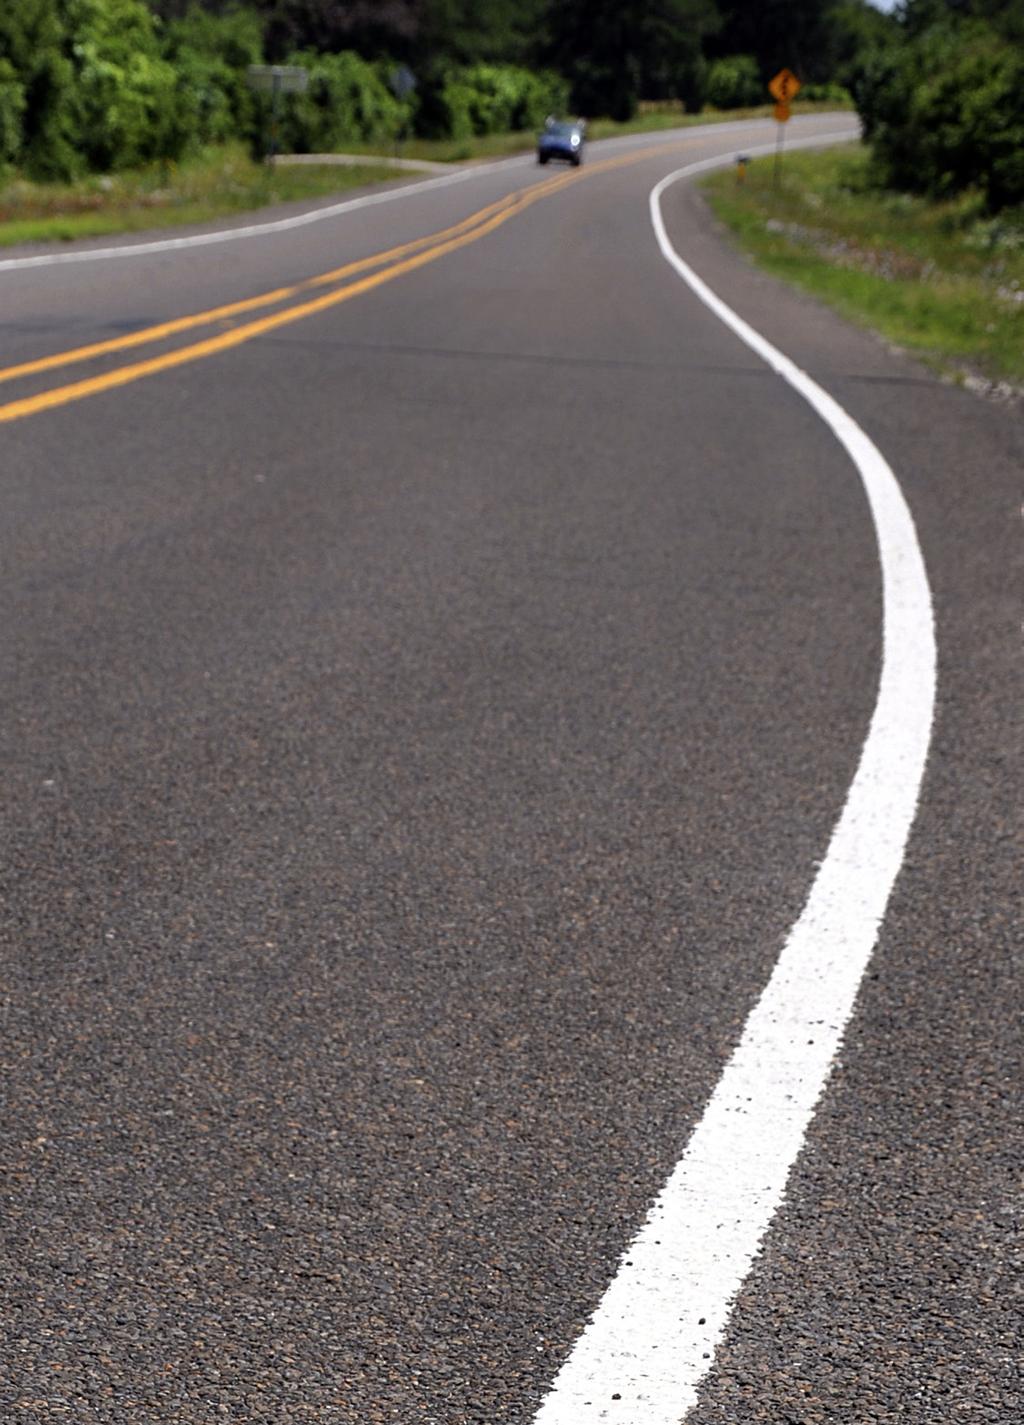 The recent analysis of Federal Highway Administration data from three states (Kansas, Michigan and Illinois) provides the necessary evidence to support adoption of wider edge lines (see Safety